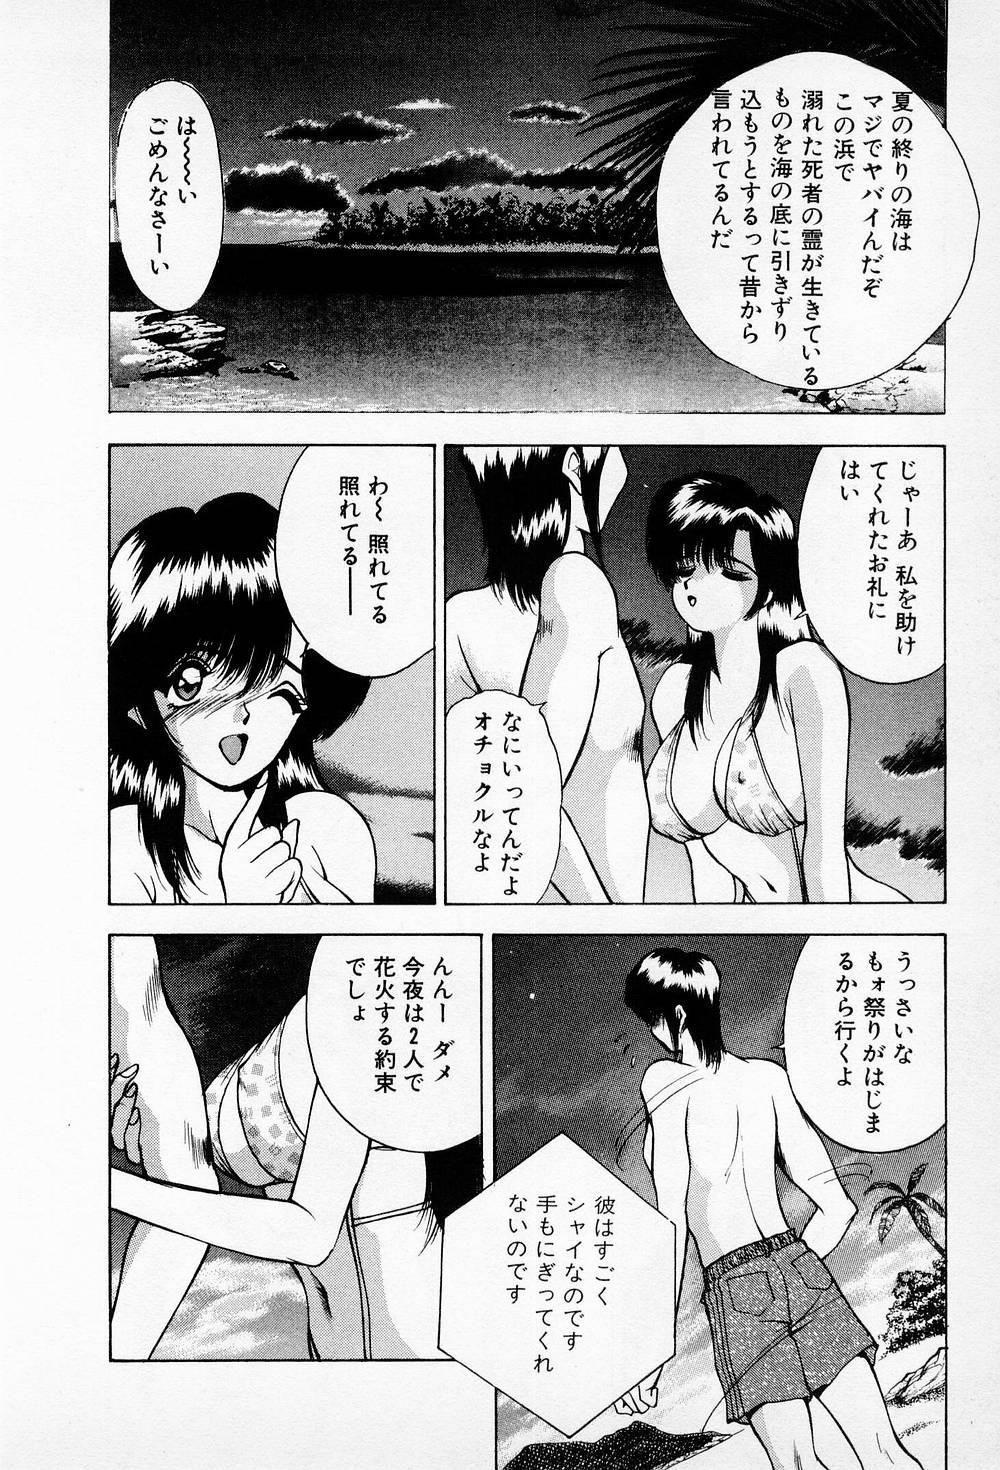 Butts Mamiko no Trip Paradise 6 Lima - Page 12